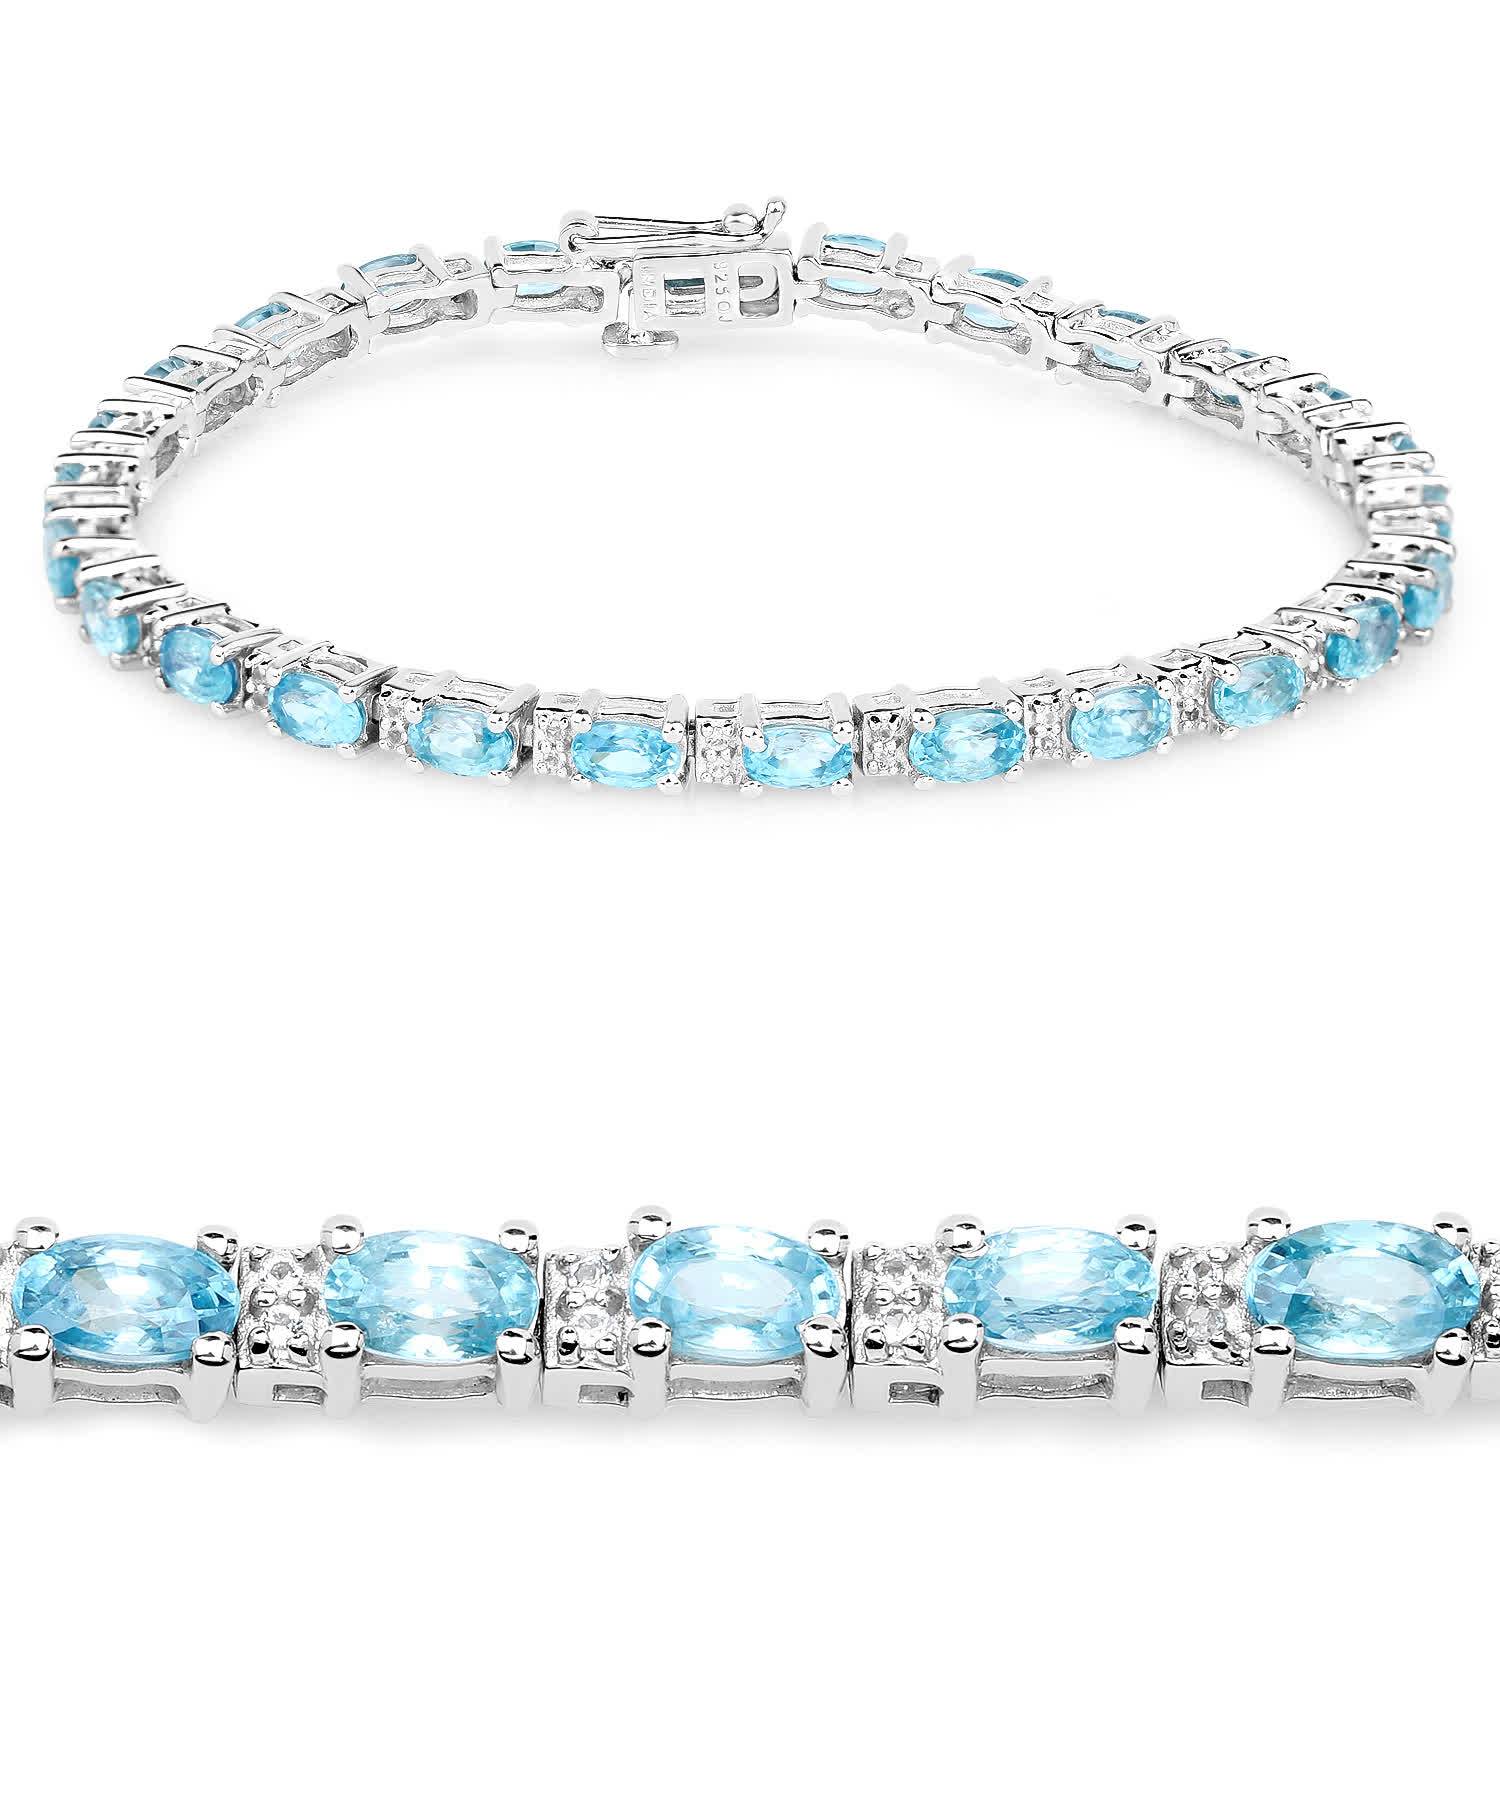 8.84ctw Natural Zircon and Topaz Rhodium Plated 925 Sterling Silver Tennis Bracelet View 2